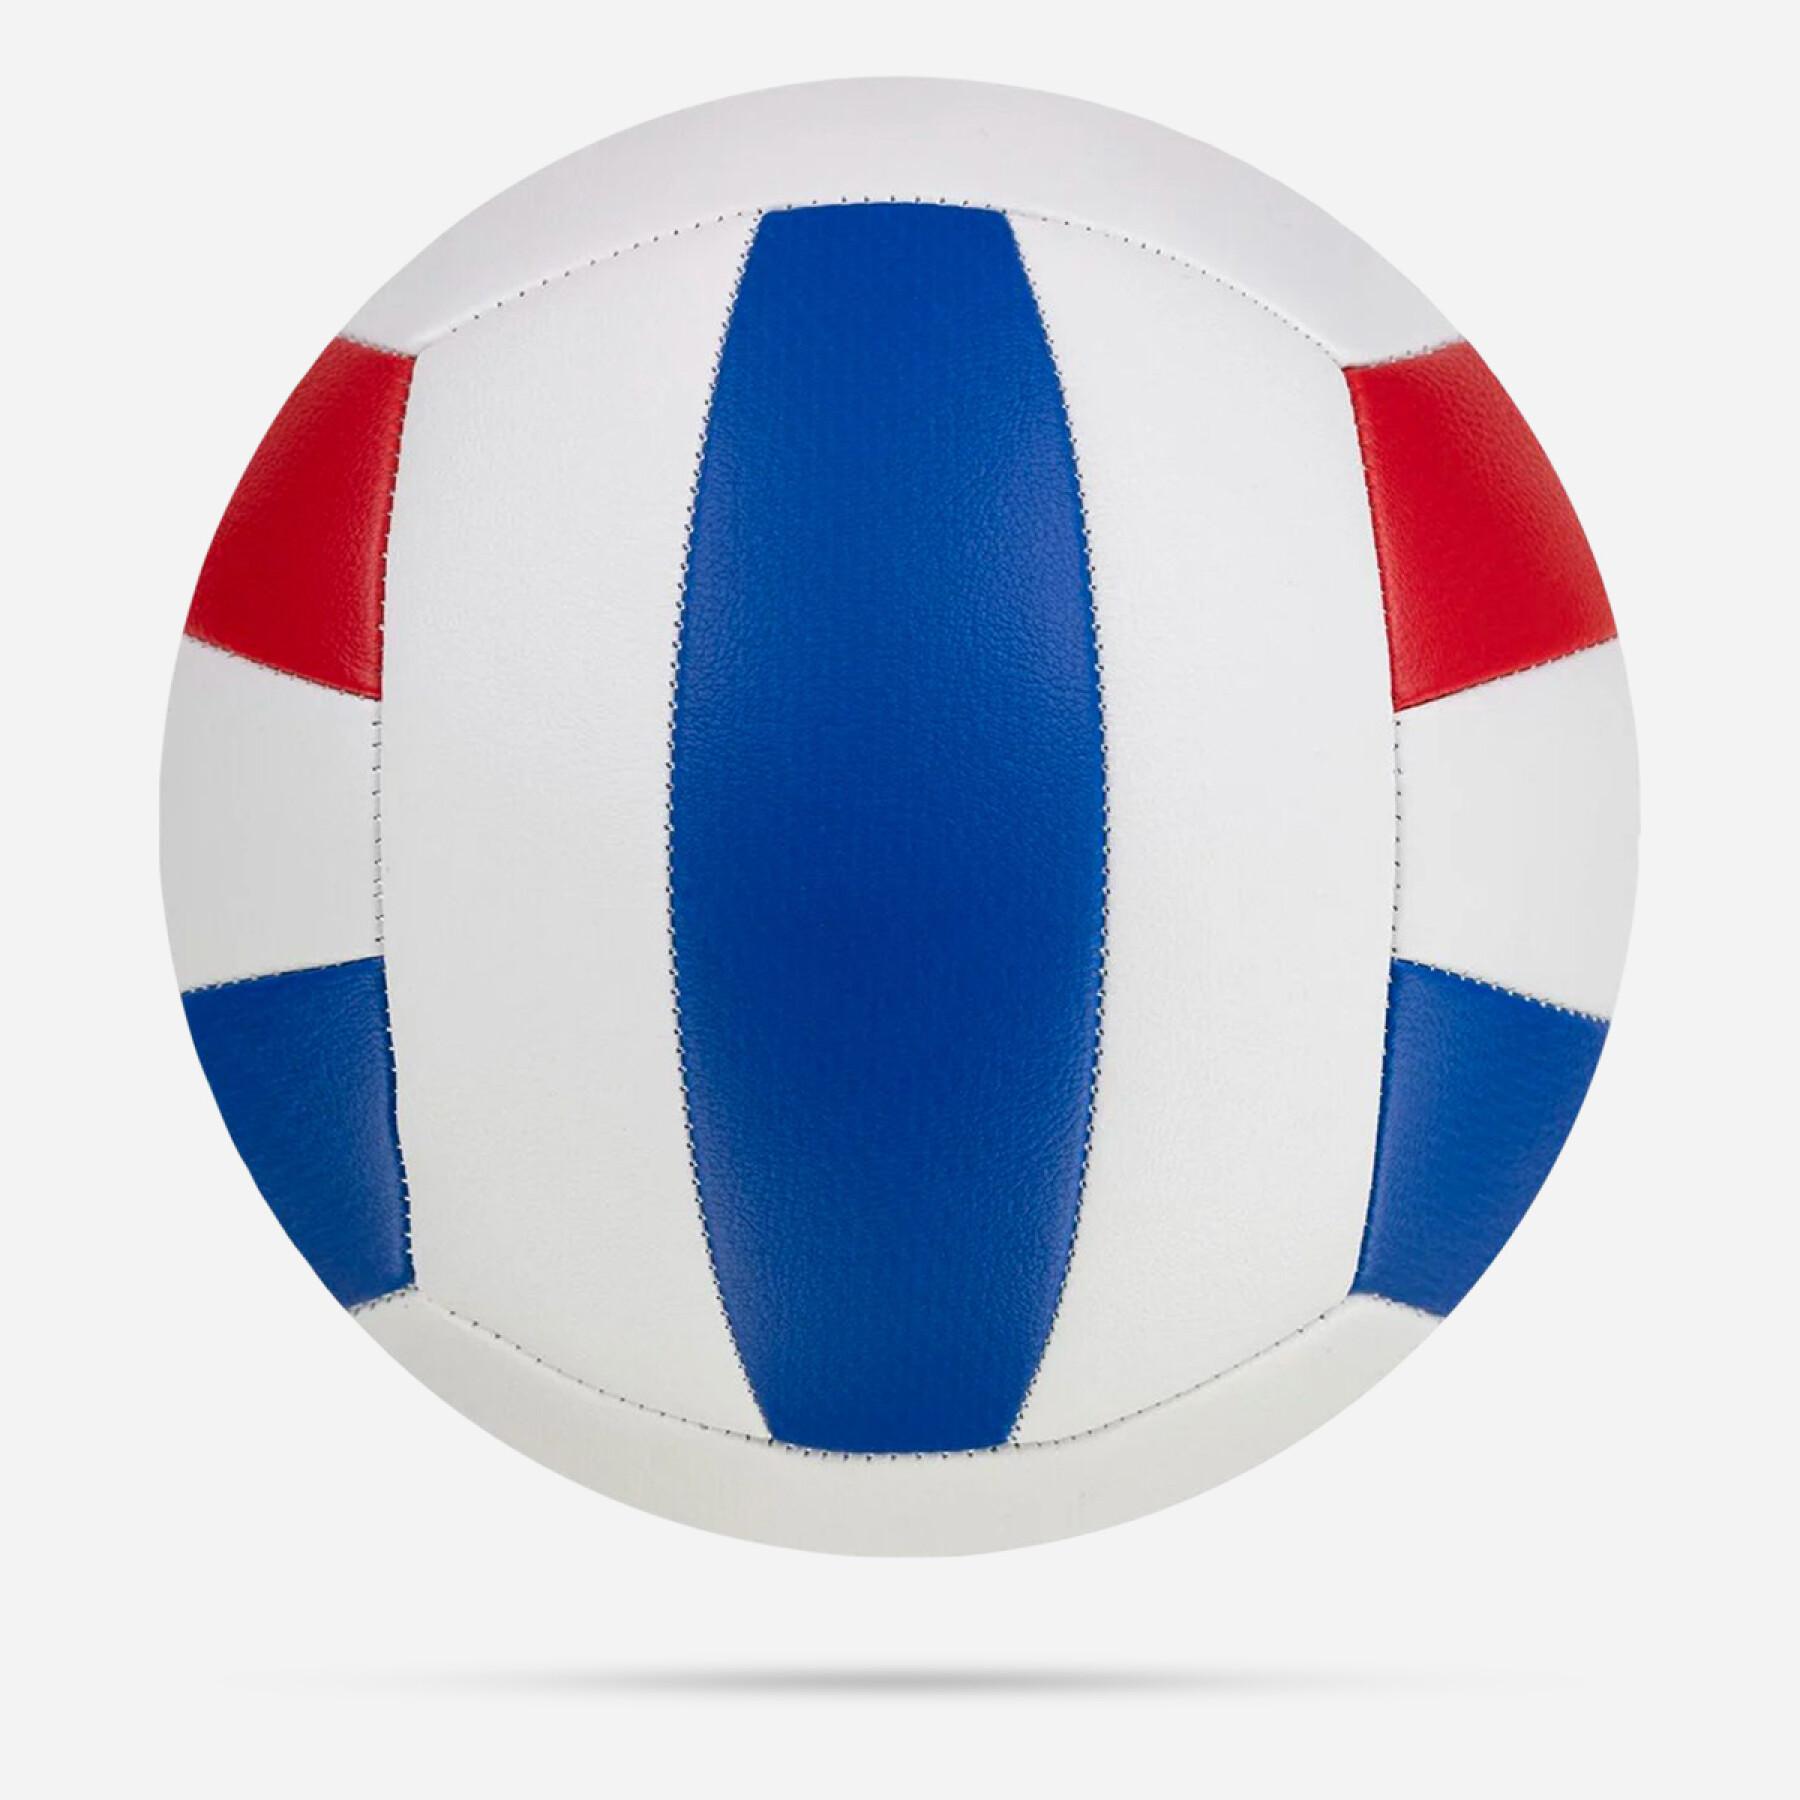 Deflated Nike All Court Volleyball